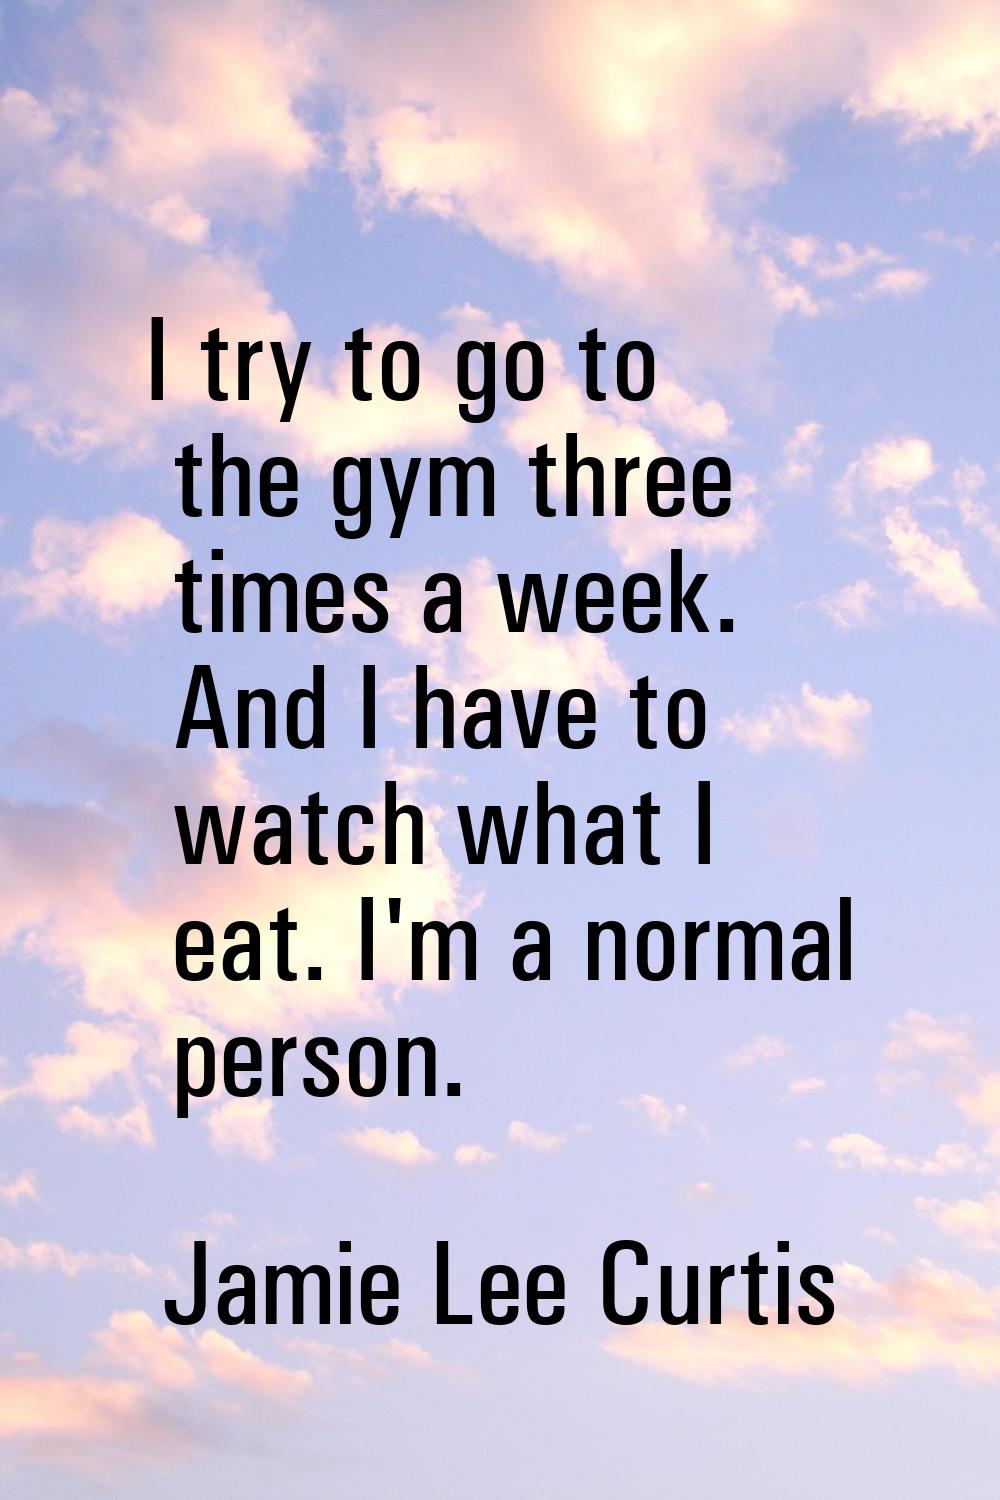 I try to go to the gym three times a week. And I have to watch what I eat. I'm a normal person.